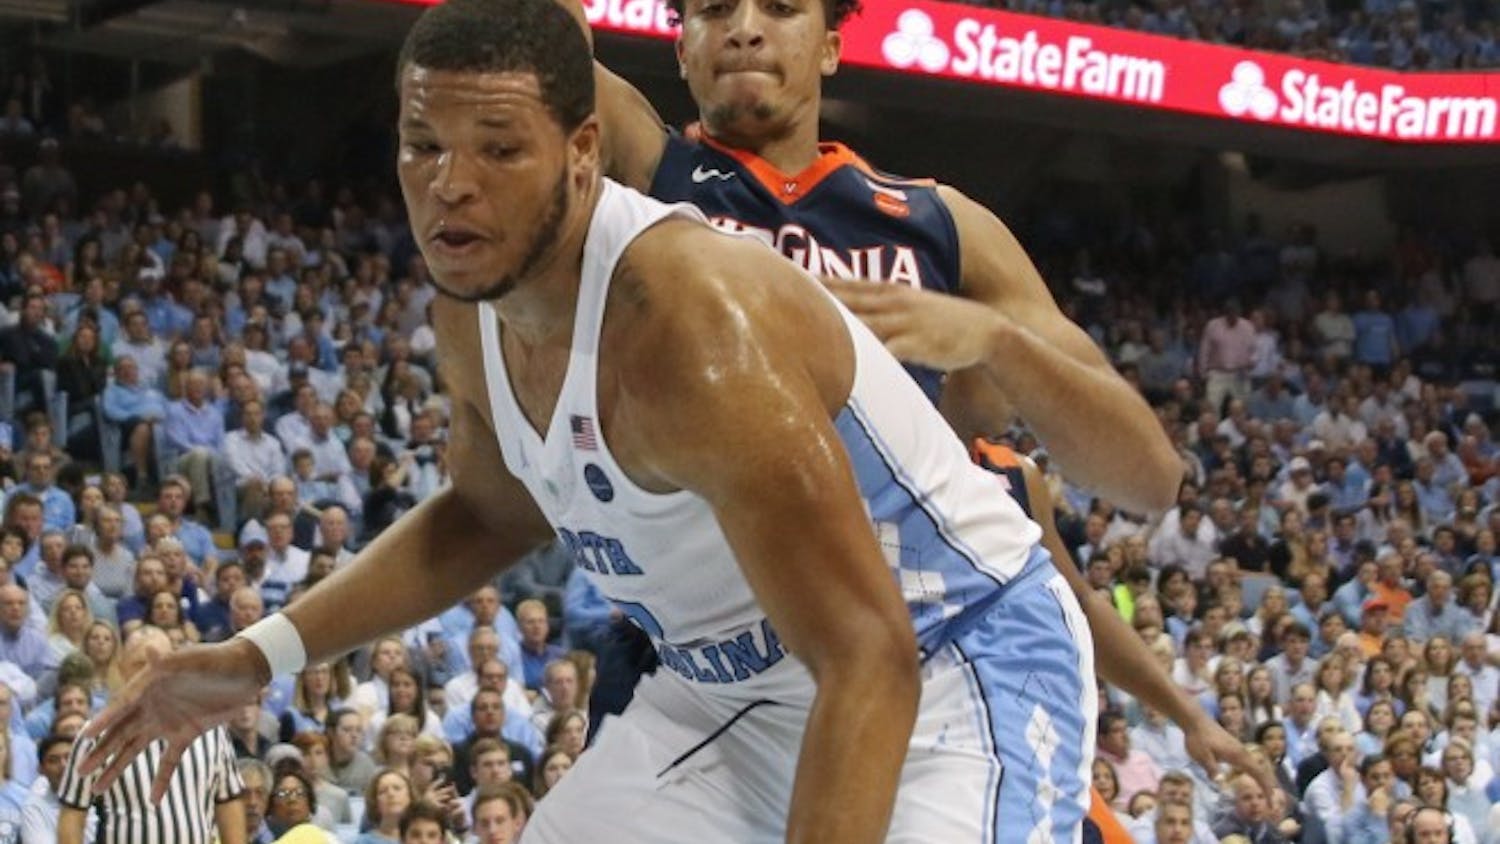 North Carolina forward Kennedy Meeks (3) attempts to work away from a Virginia defender under the basket Saturday.